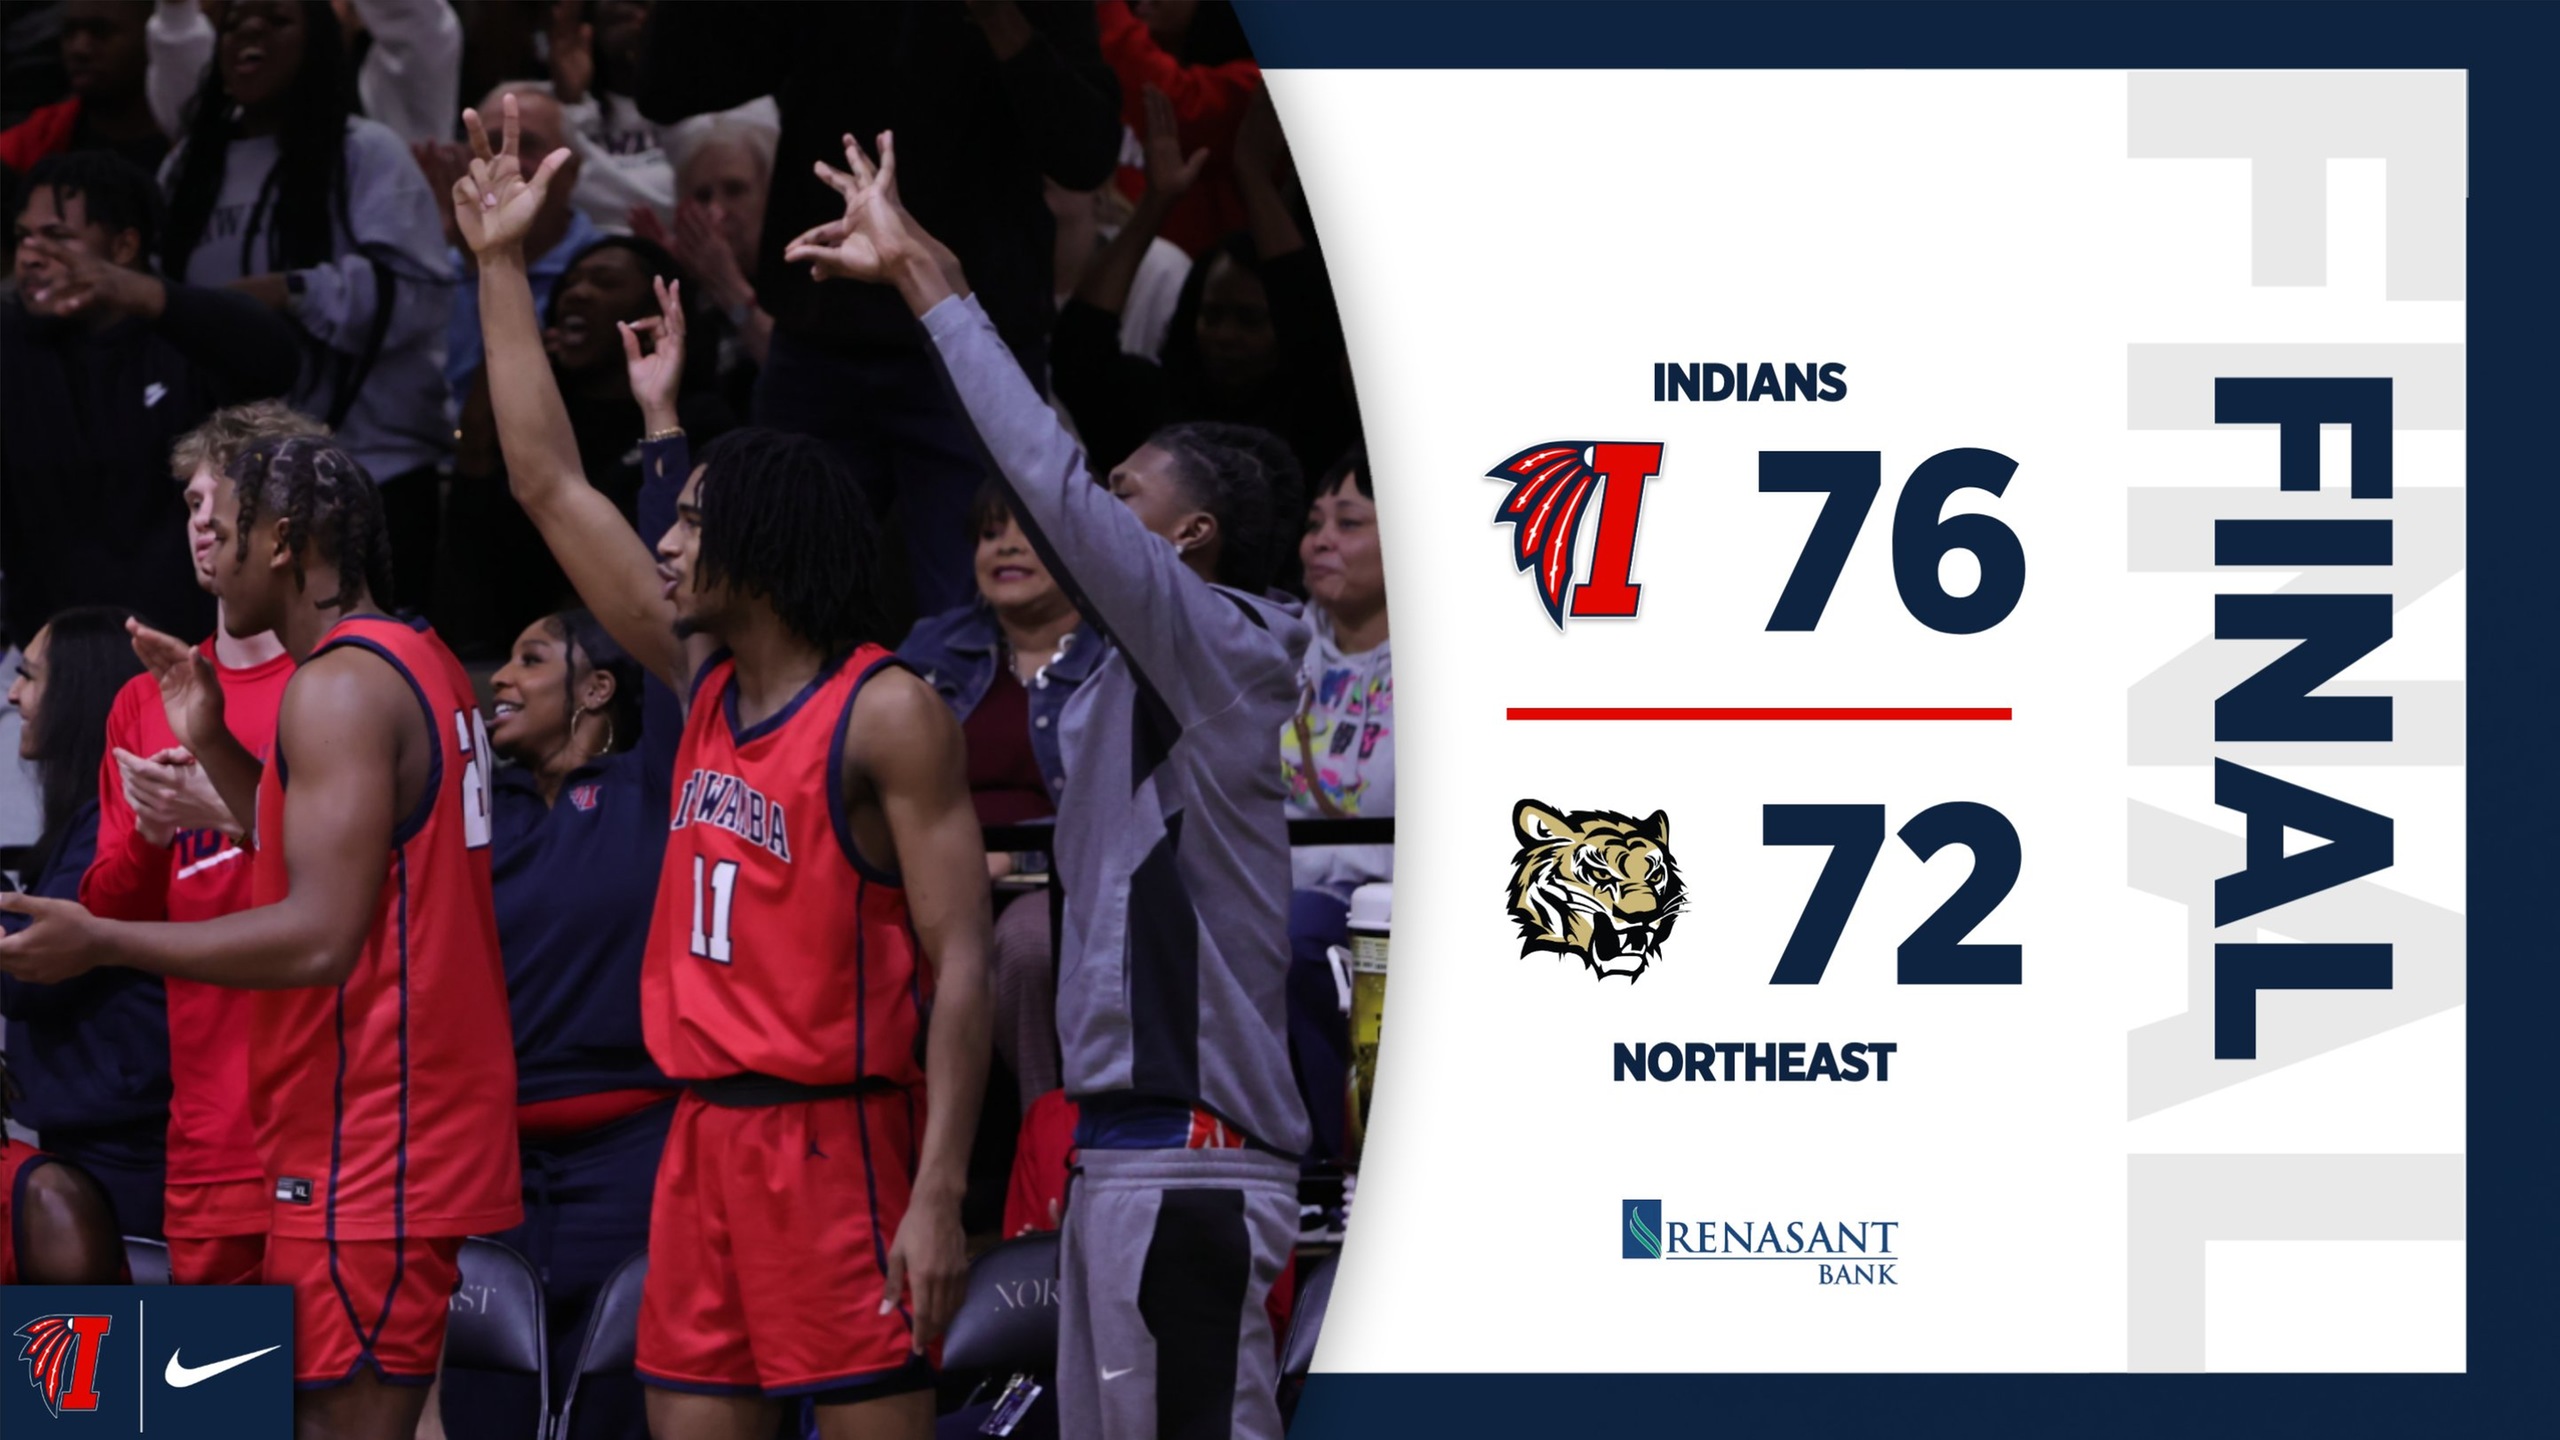 Indians earn road win over rival Northeast, 76-72